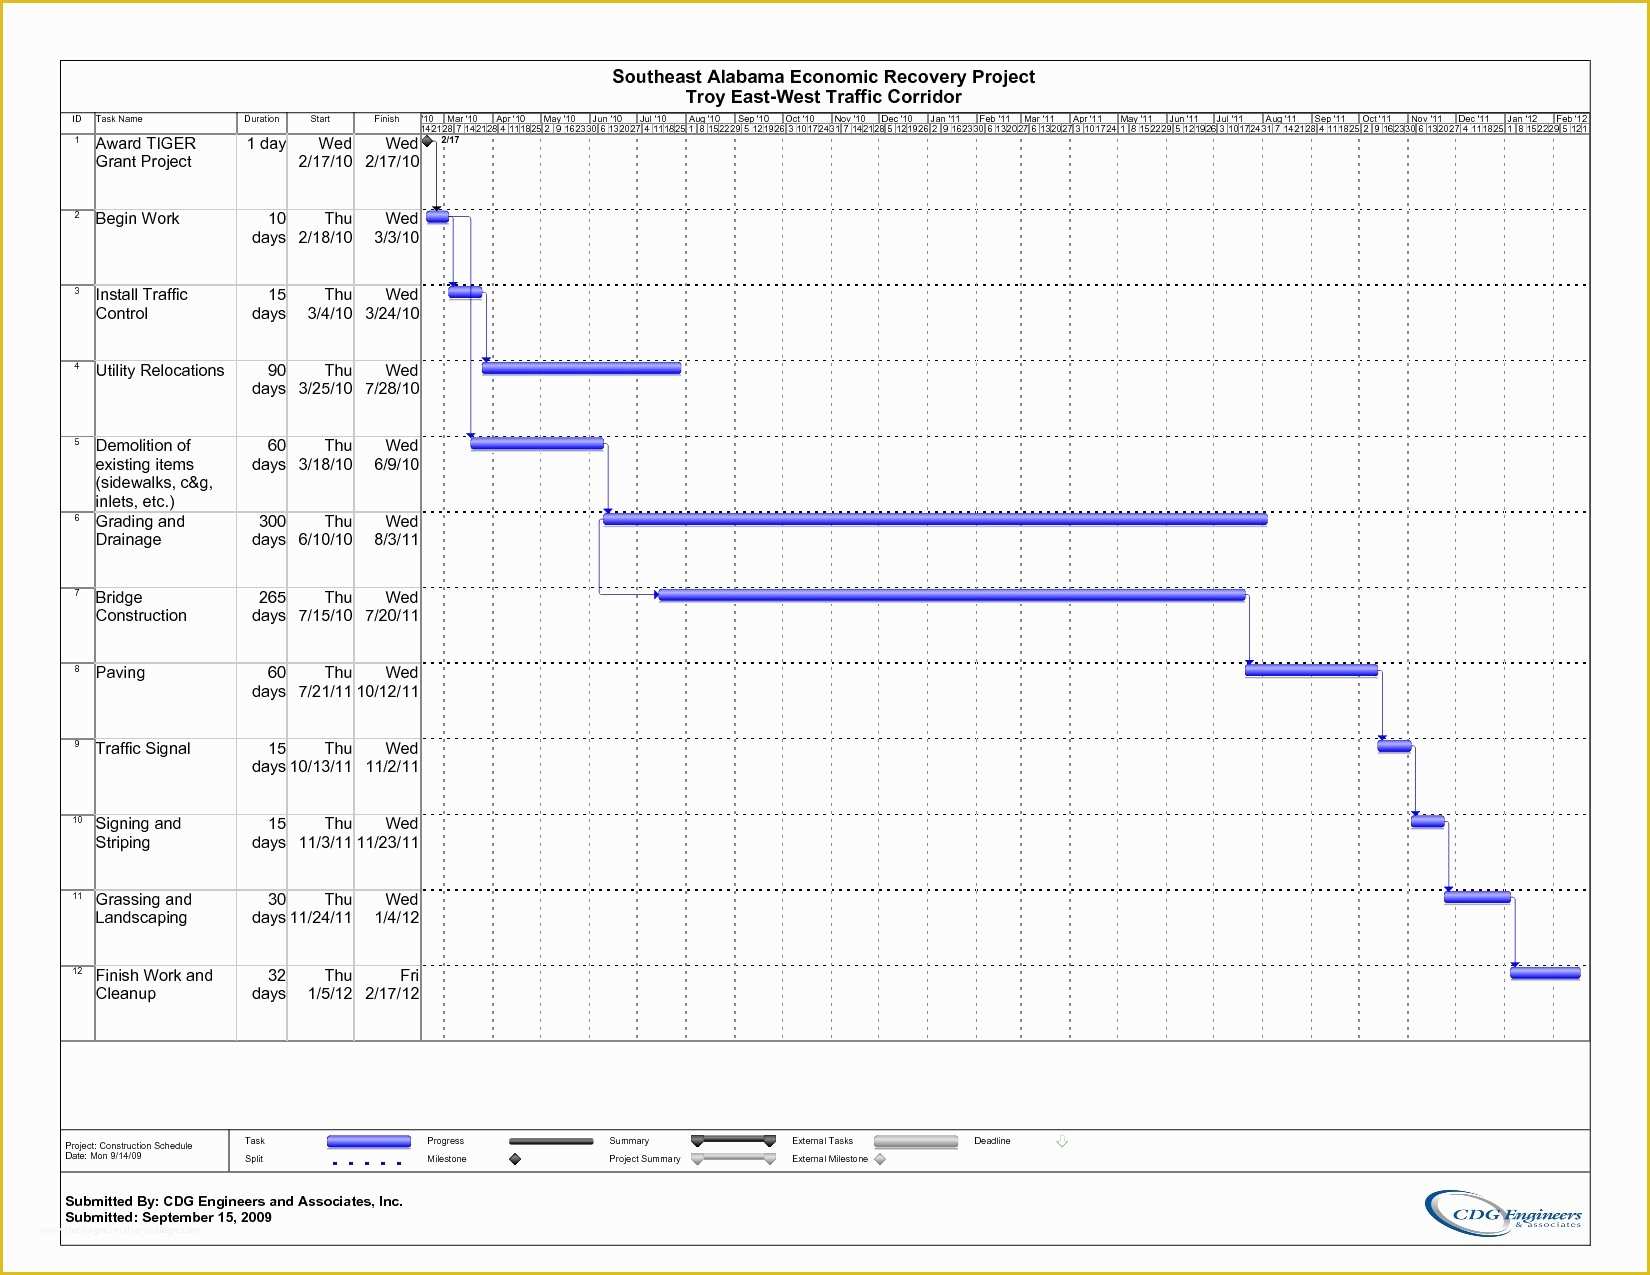 Time Management Excel Template Free Of Time Management Template Excel Timeline Spreadshee Time